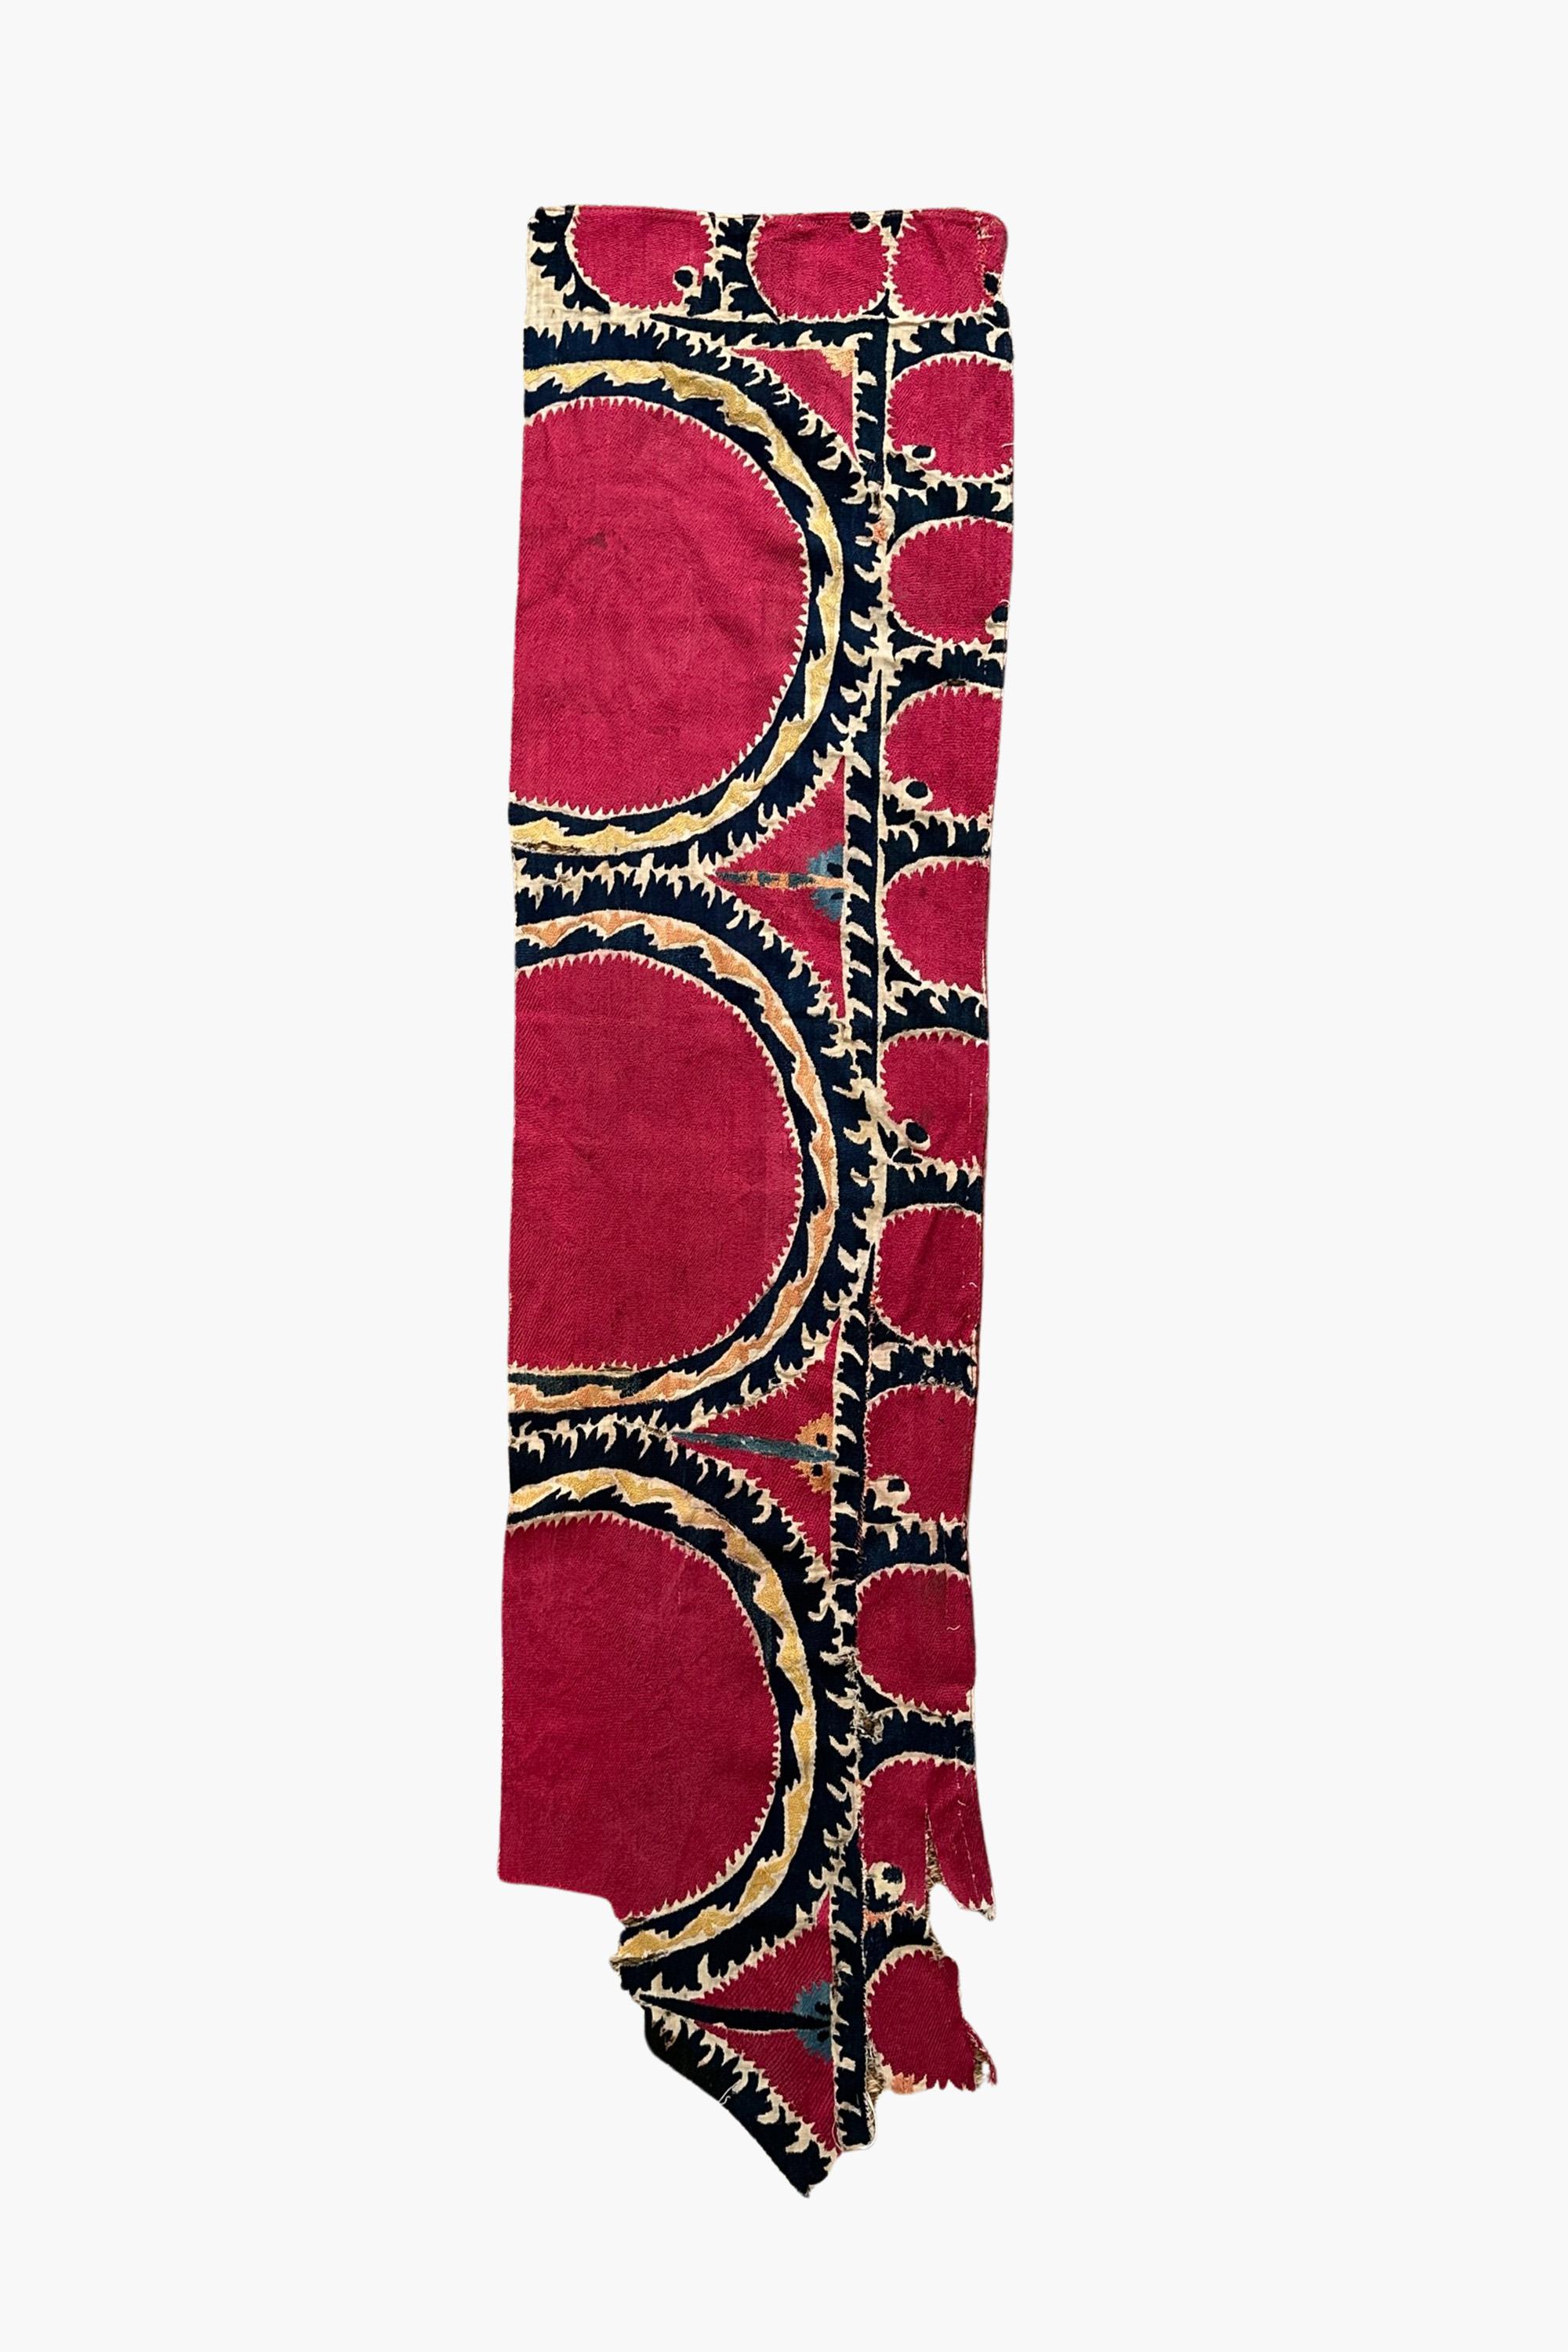 Charming Suzani fragment from either Tashkent or Pishkent.

Could be mounted onto a fabric covered stretcher or made into cushion covers.

circa 1900